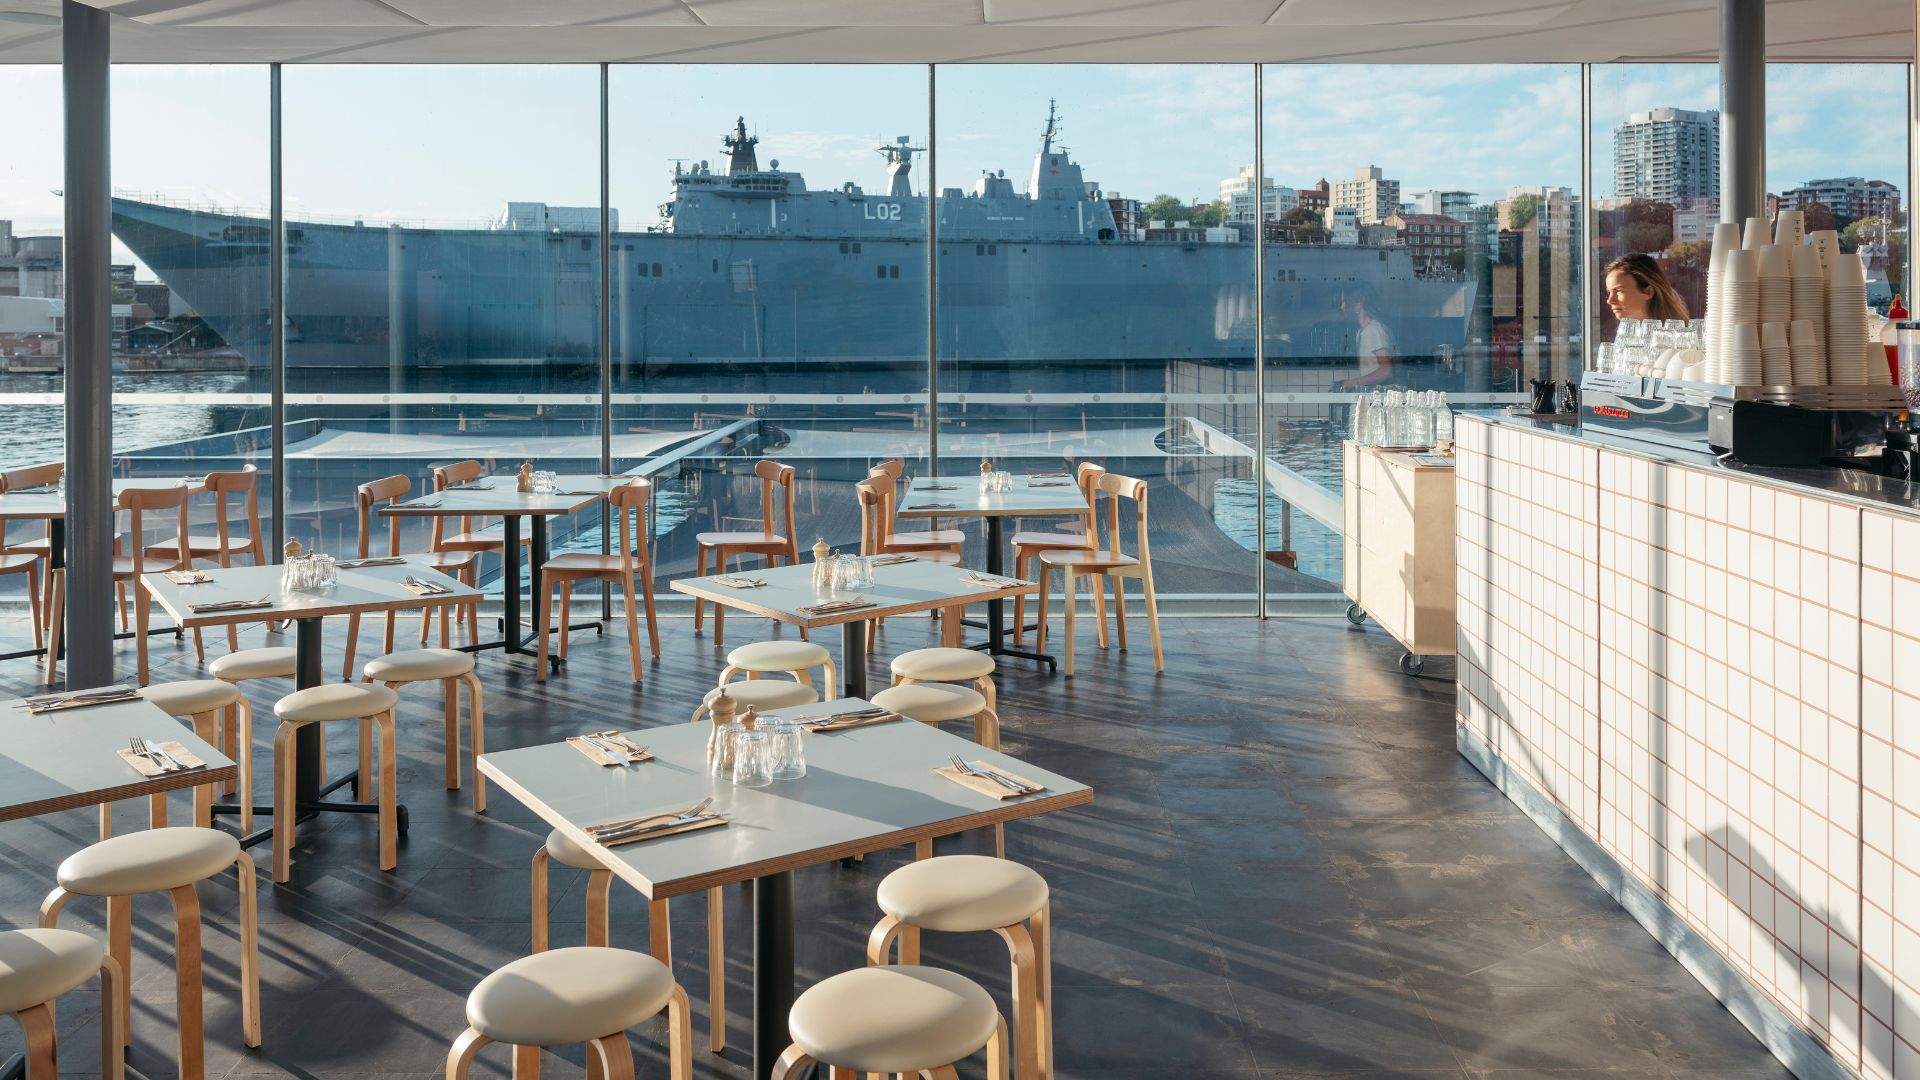 Indoor seating of Oh Boy Café, featuring floor-to-ceiling windows capturing the panoramic waterfront views.